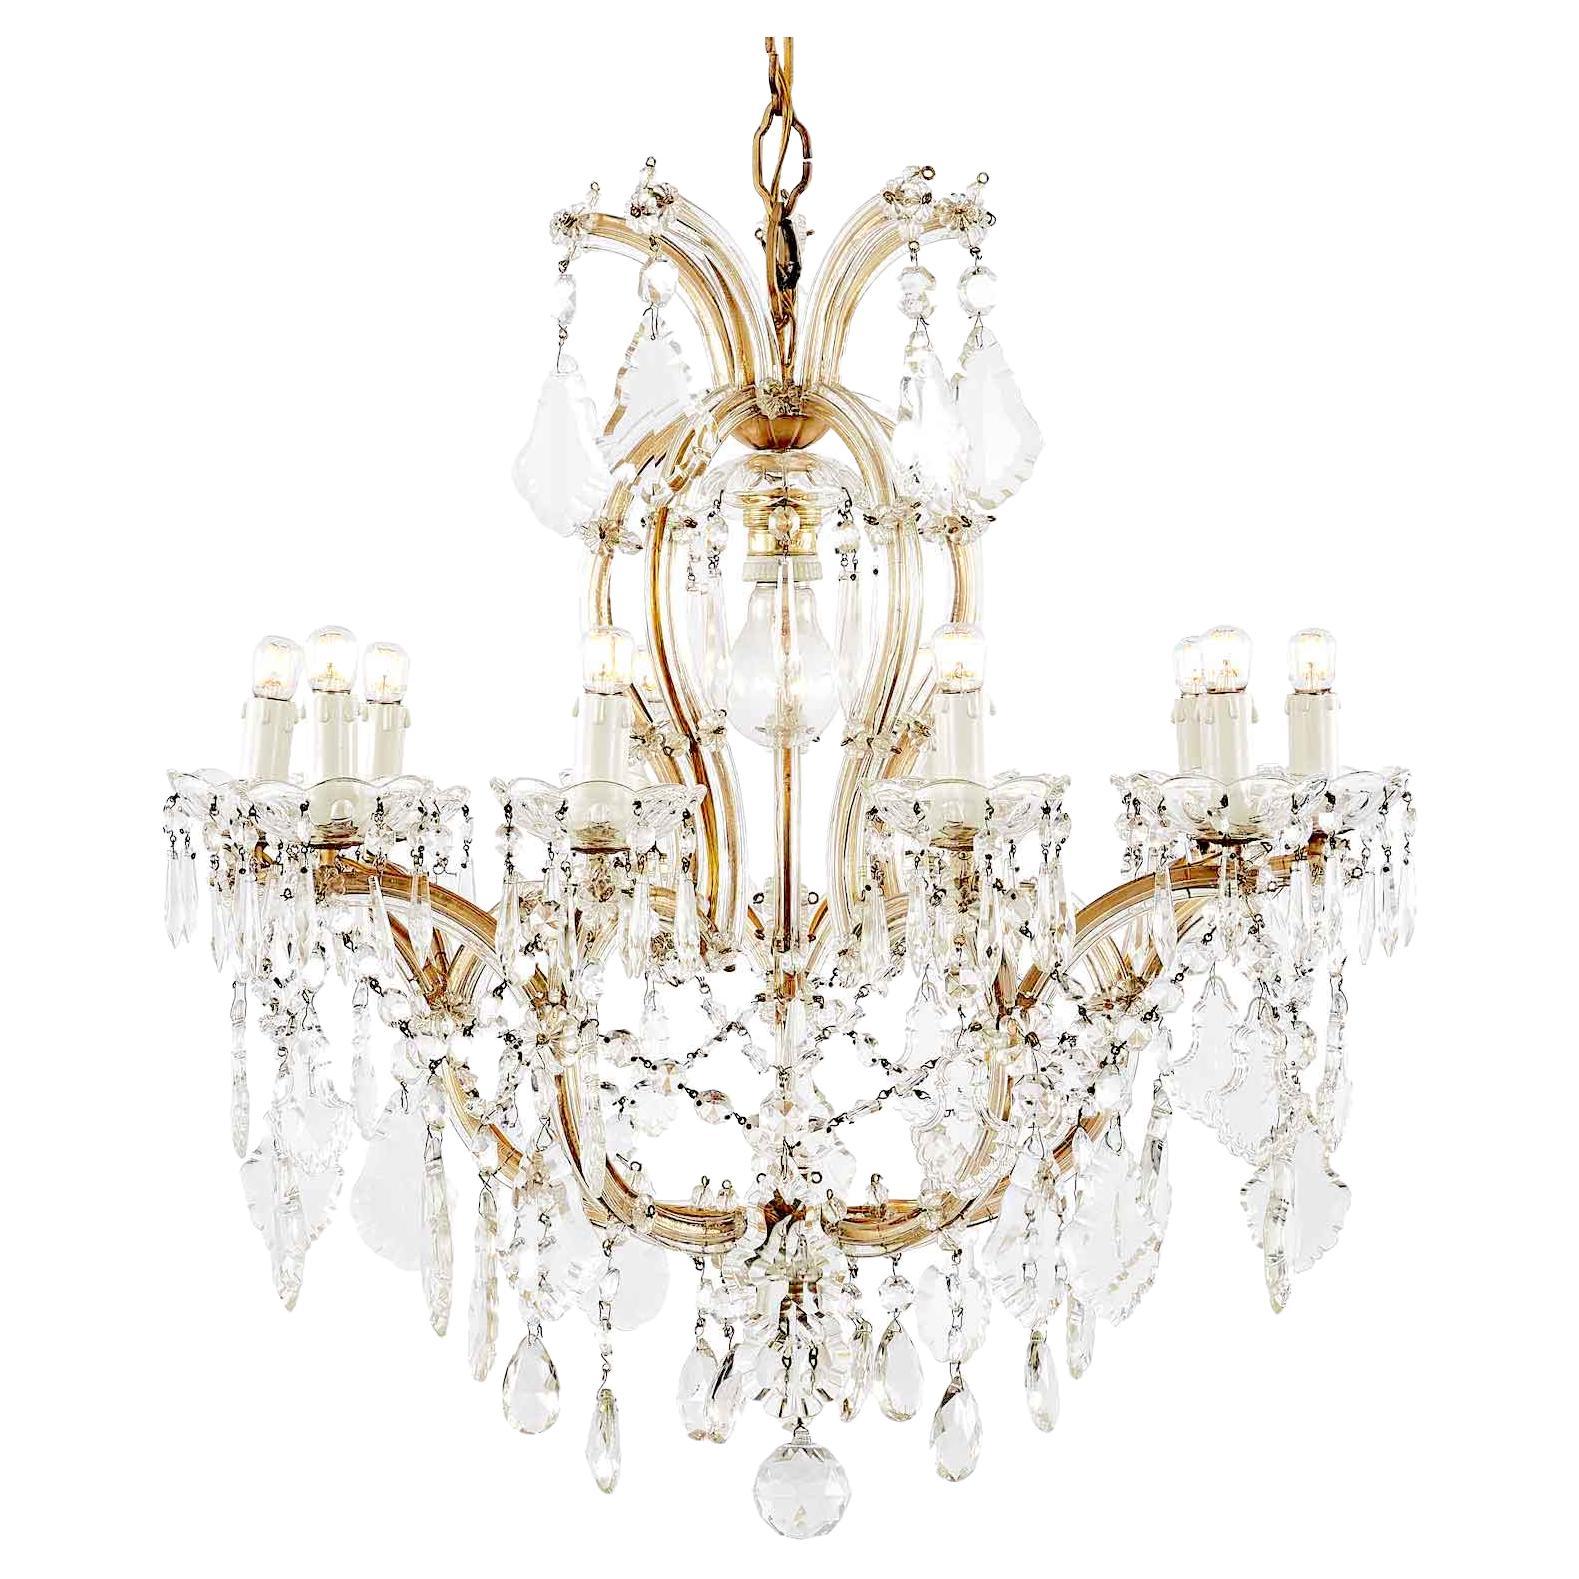 20th Century Italian Crystal Chandelier Ten Armed Maria Theresa Style For Sale